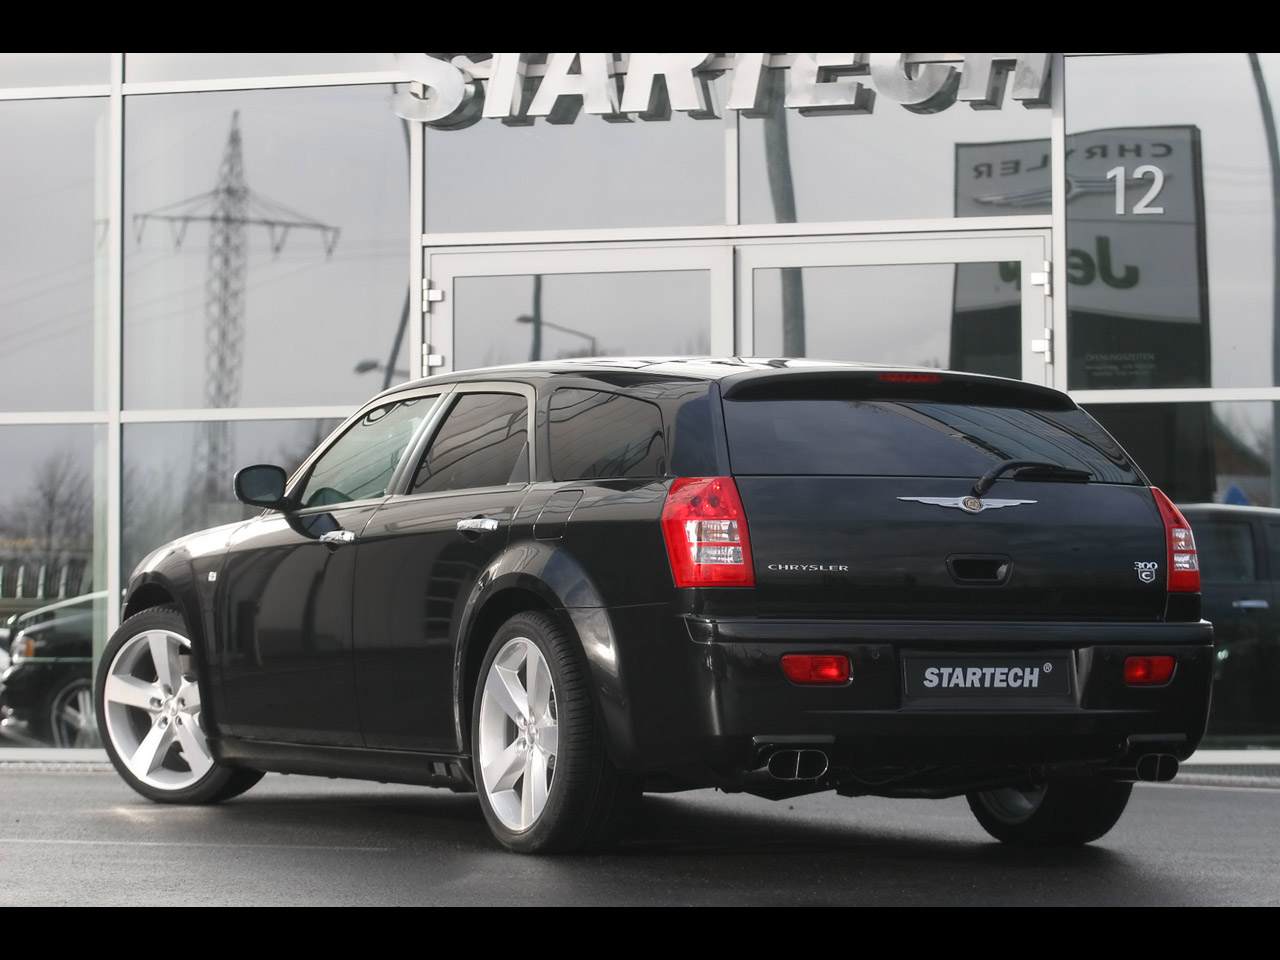 2012 Chrysler 300 touring review #5